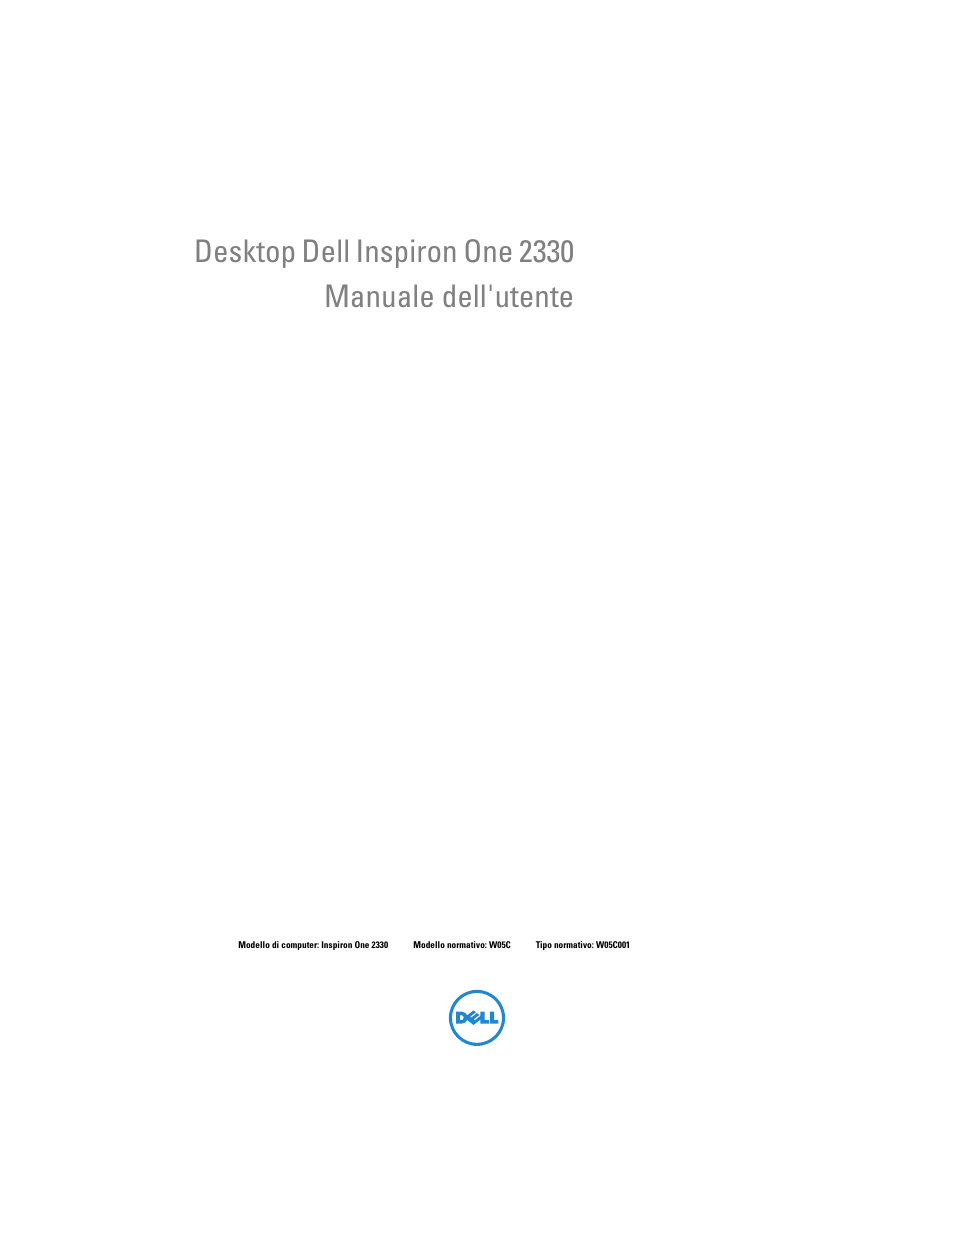 Dell Inspiron One 2330 (Mid 2012) Manuale d'uso | Pagine: 144